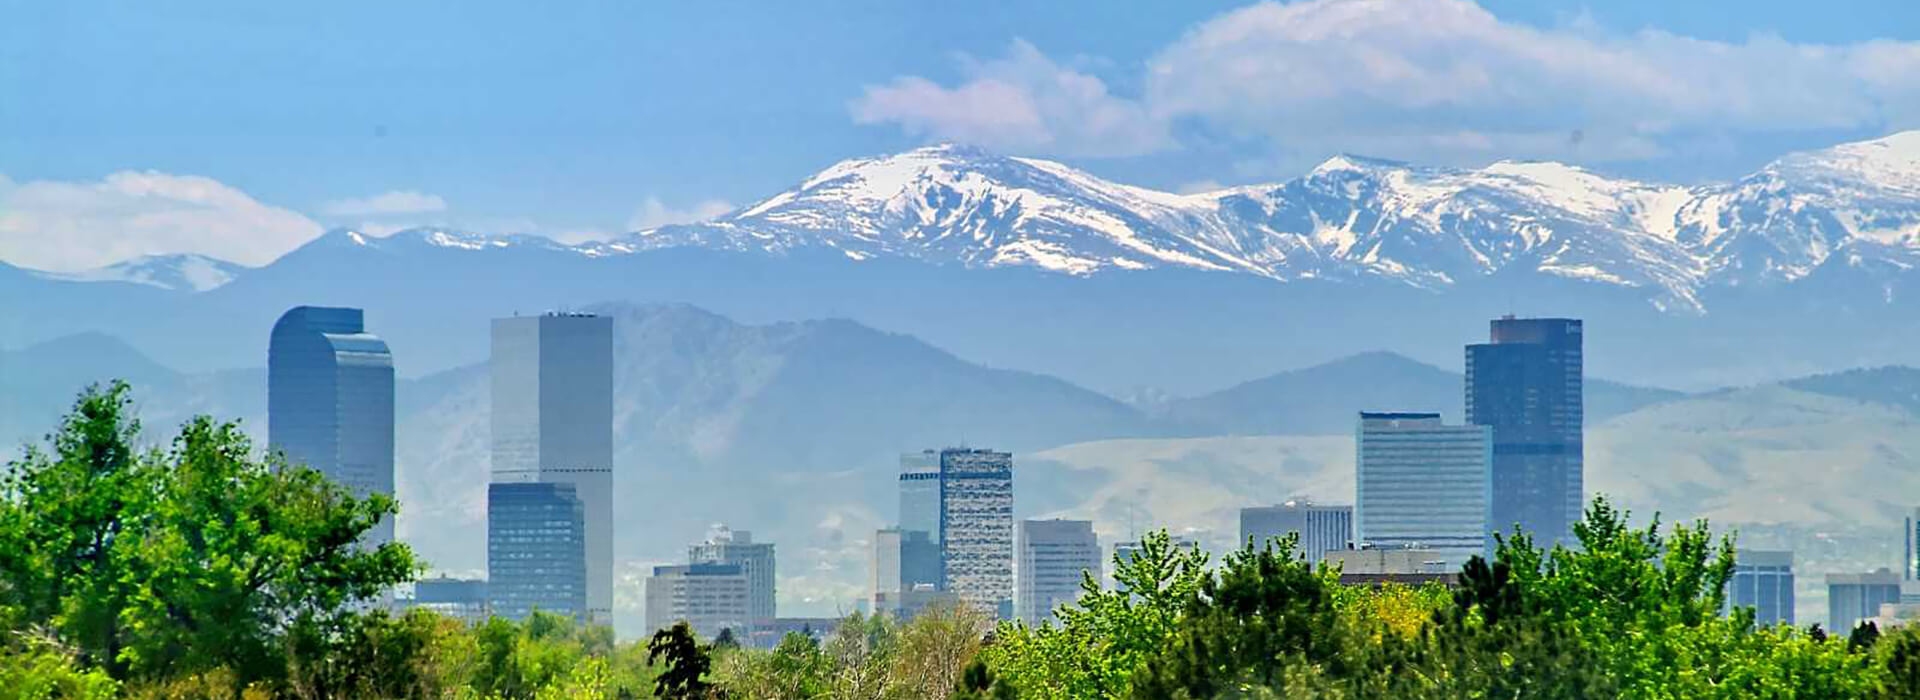 Denver skyline with mountains and trees